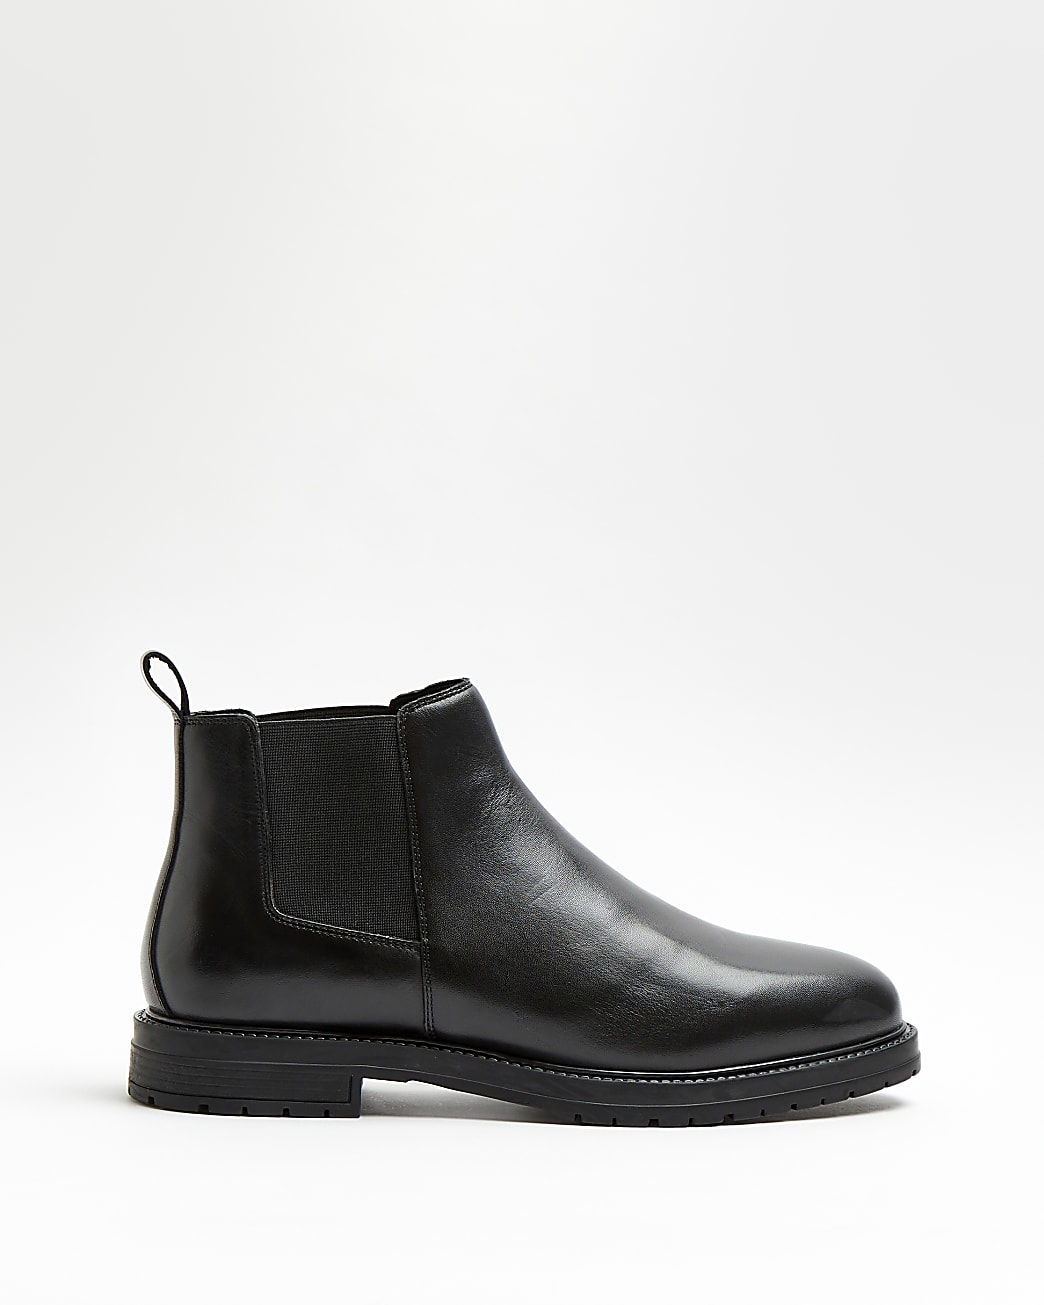 Black wide fit low leather chelsea boots